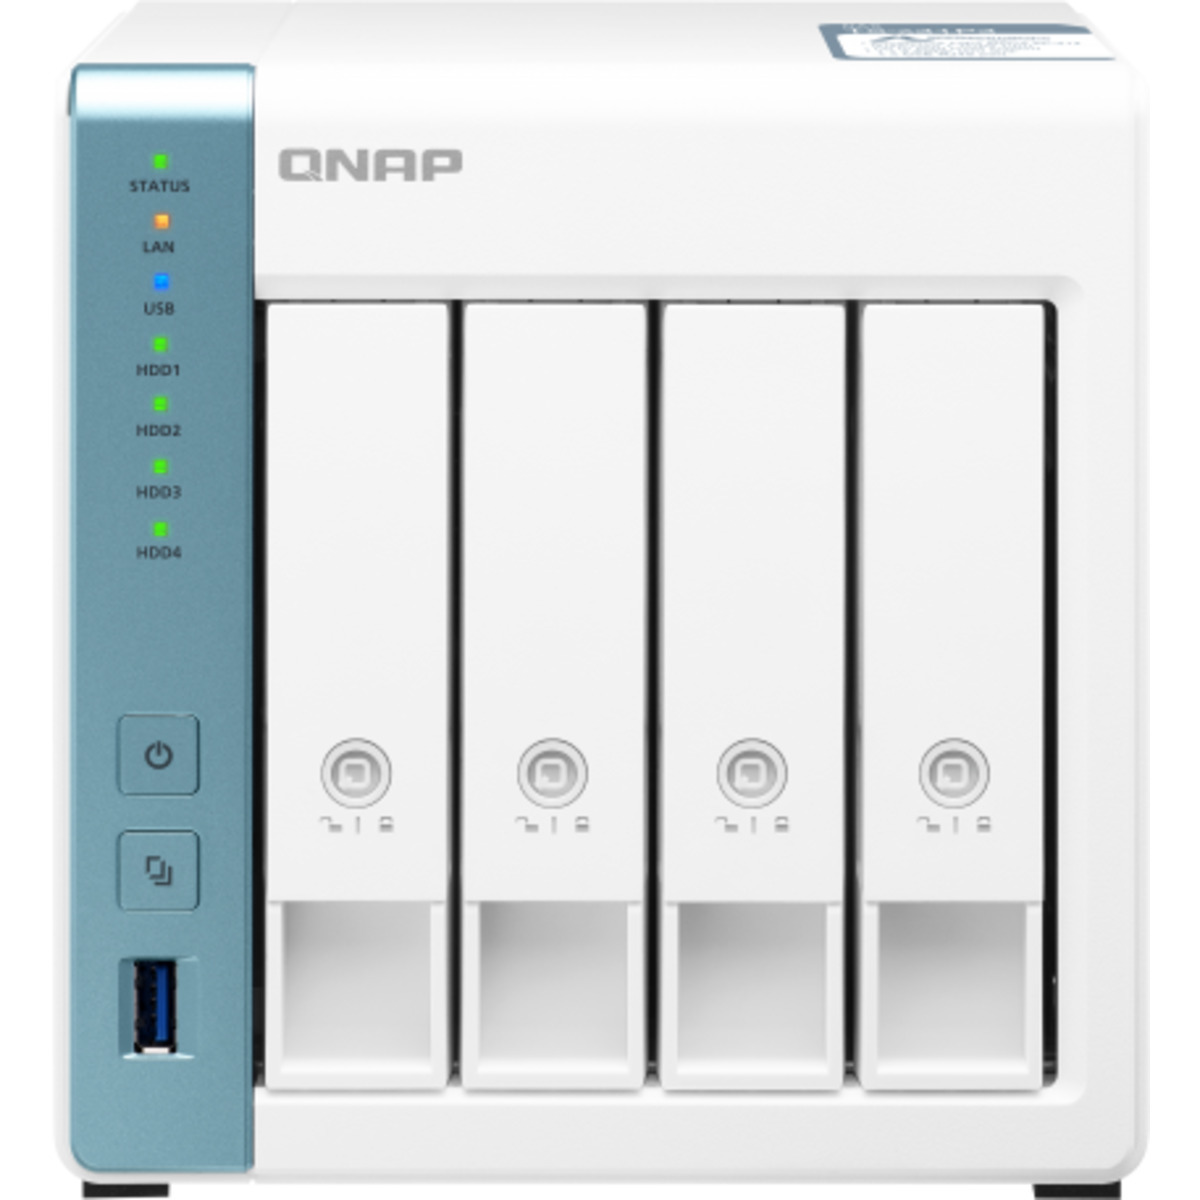 buy $1997 QNAP TS-431P3 80tb Desktop NAS - Network Attached Storage Device 4x20000gb Seagate EXOS X20 ST20000NM007D 3.5 7200rpm SATA 6Gb/s HDD ENTERPRISE Class Drives Installed - Burn-In Tested - FREE RAM UPGRADE - nas headquarters buy network attached storage server device das new raid-5 free shipping usa TS-431P3